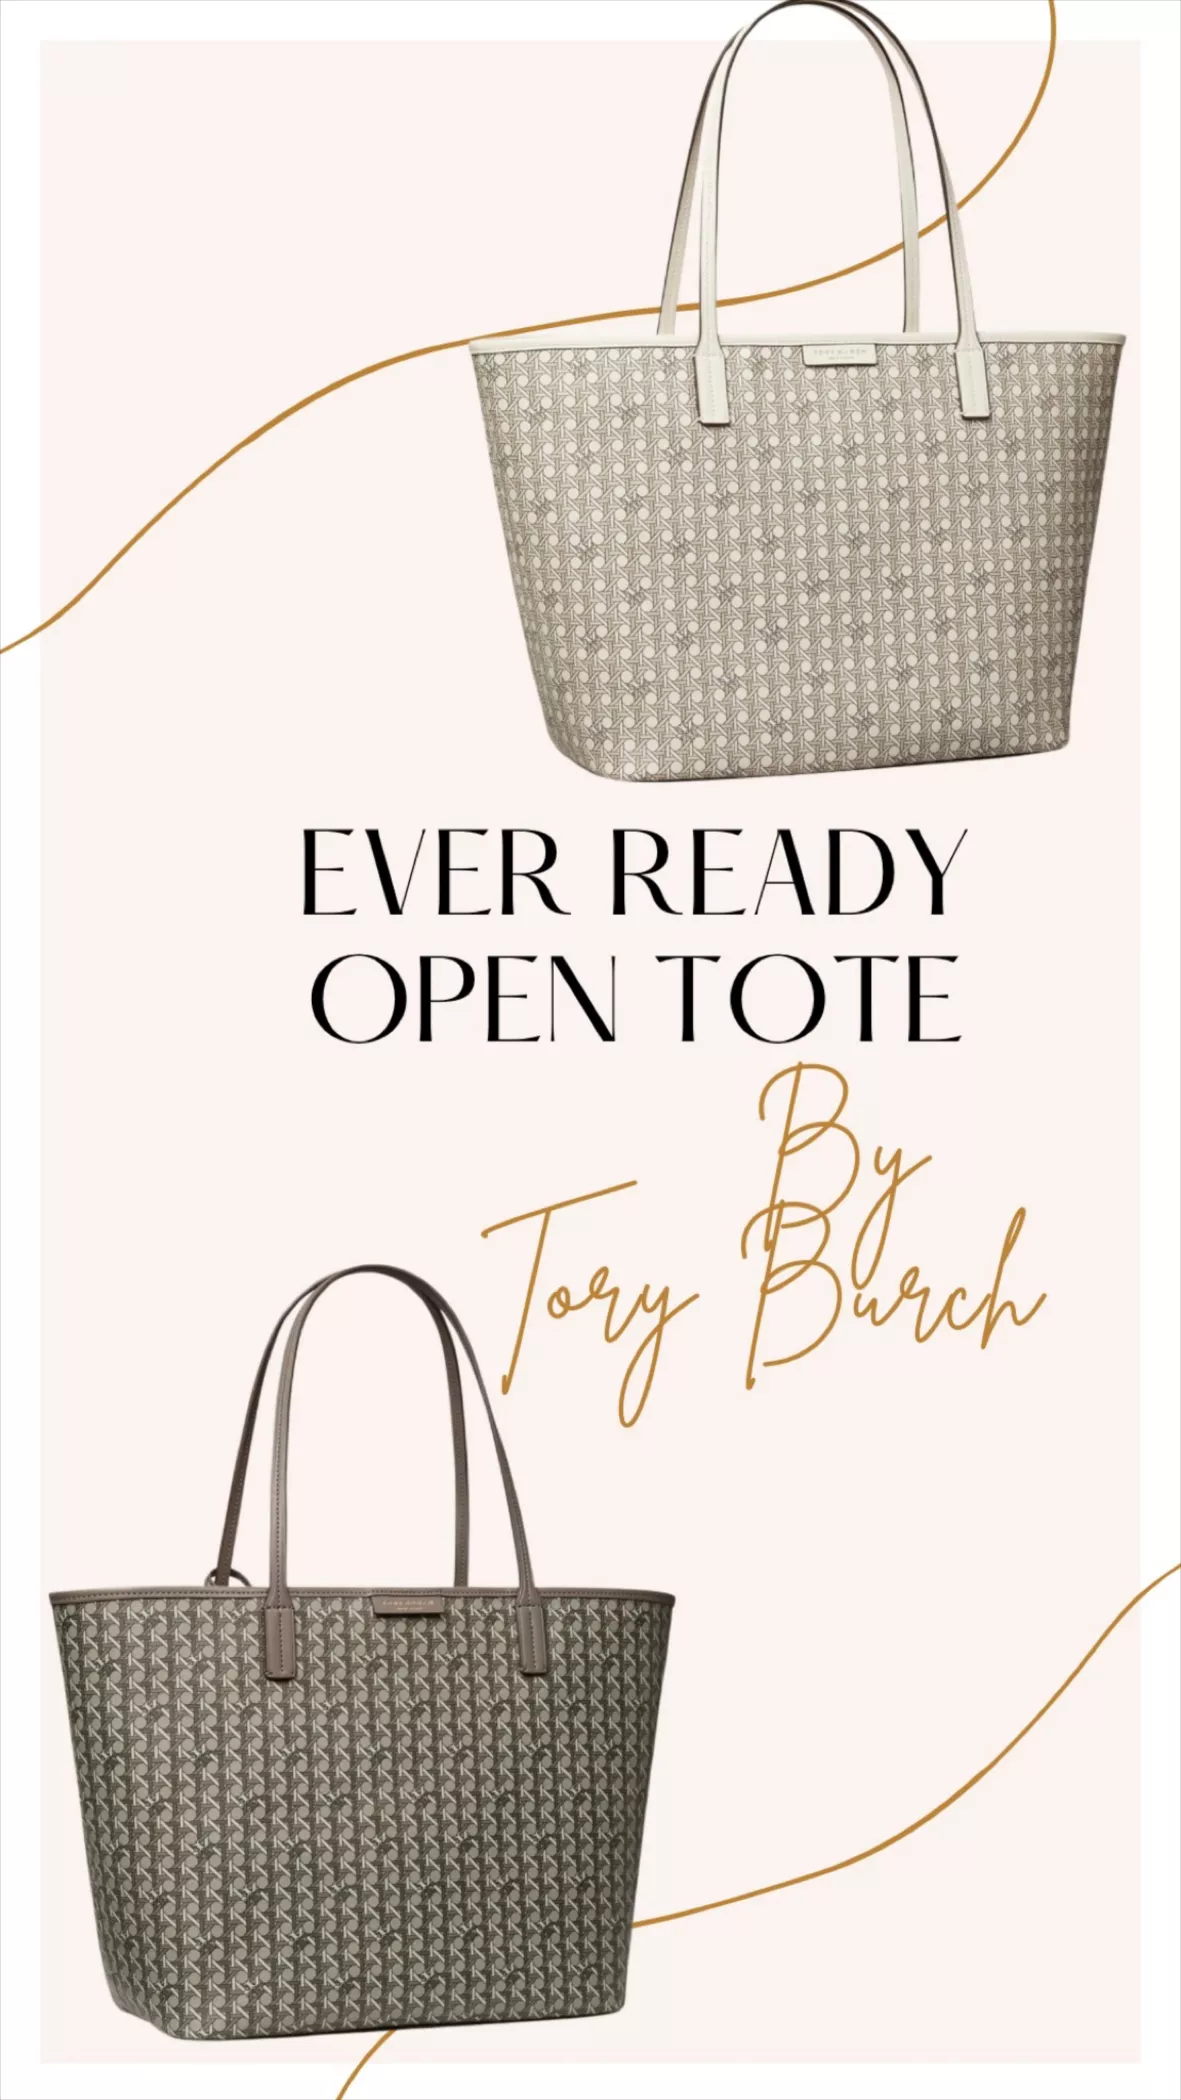 Bags, Tory Burch Neverfull Style Bag